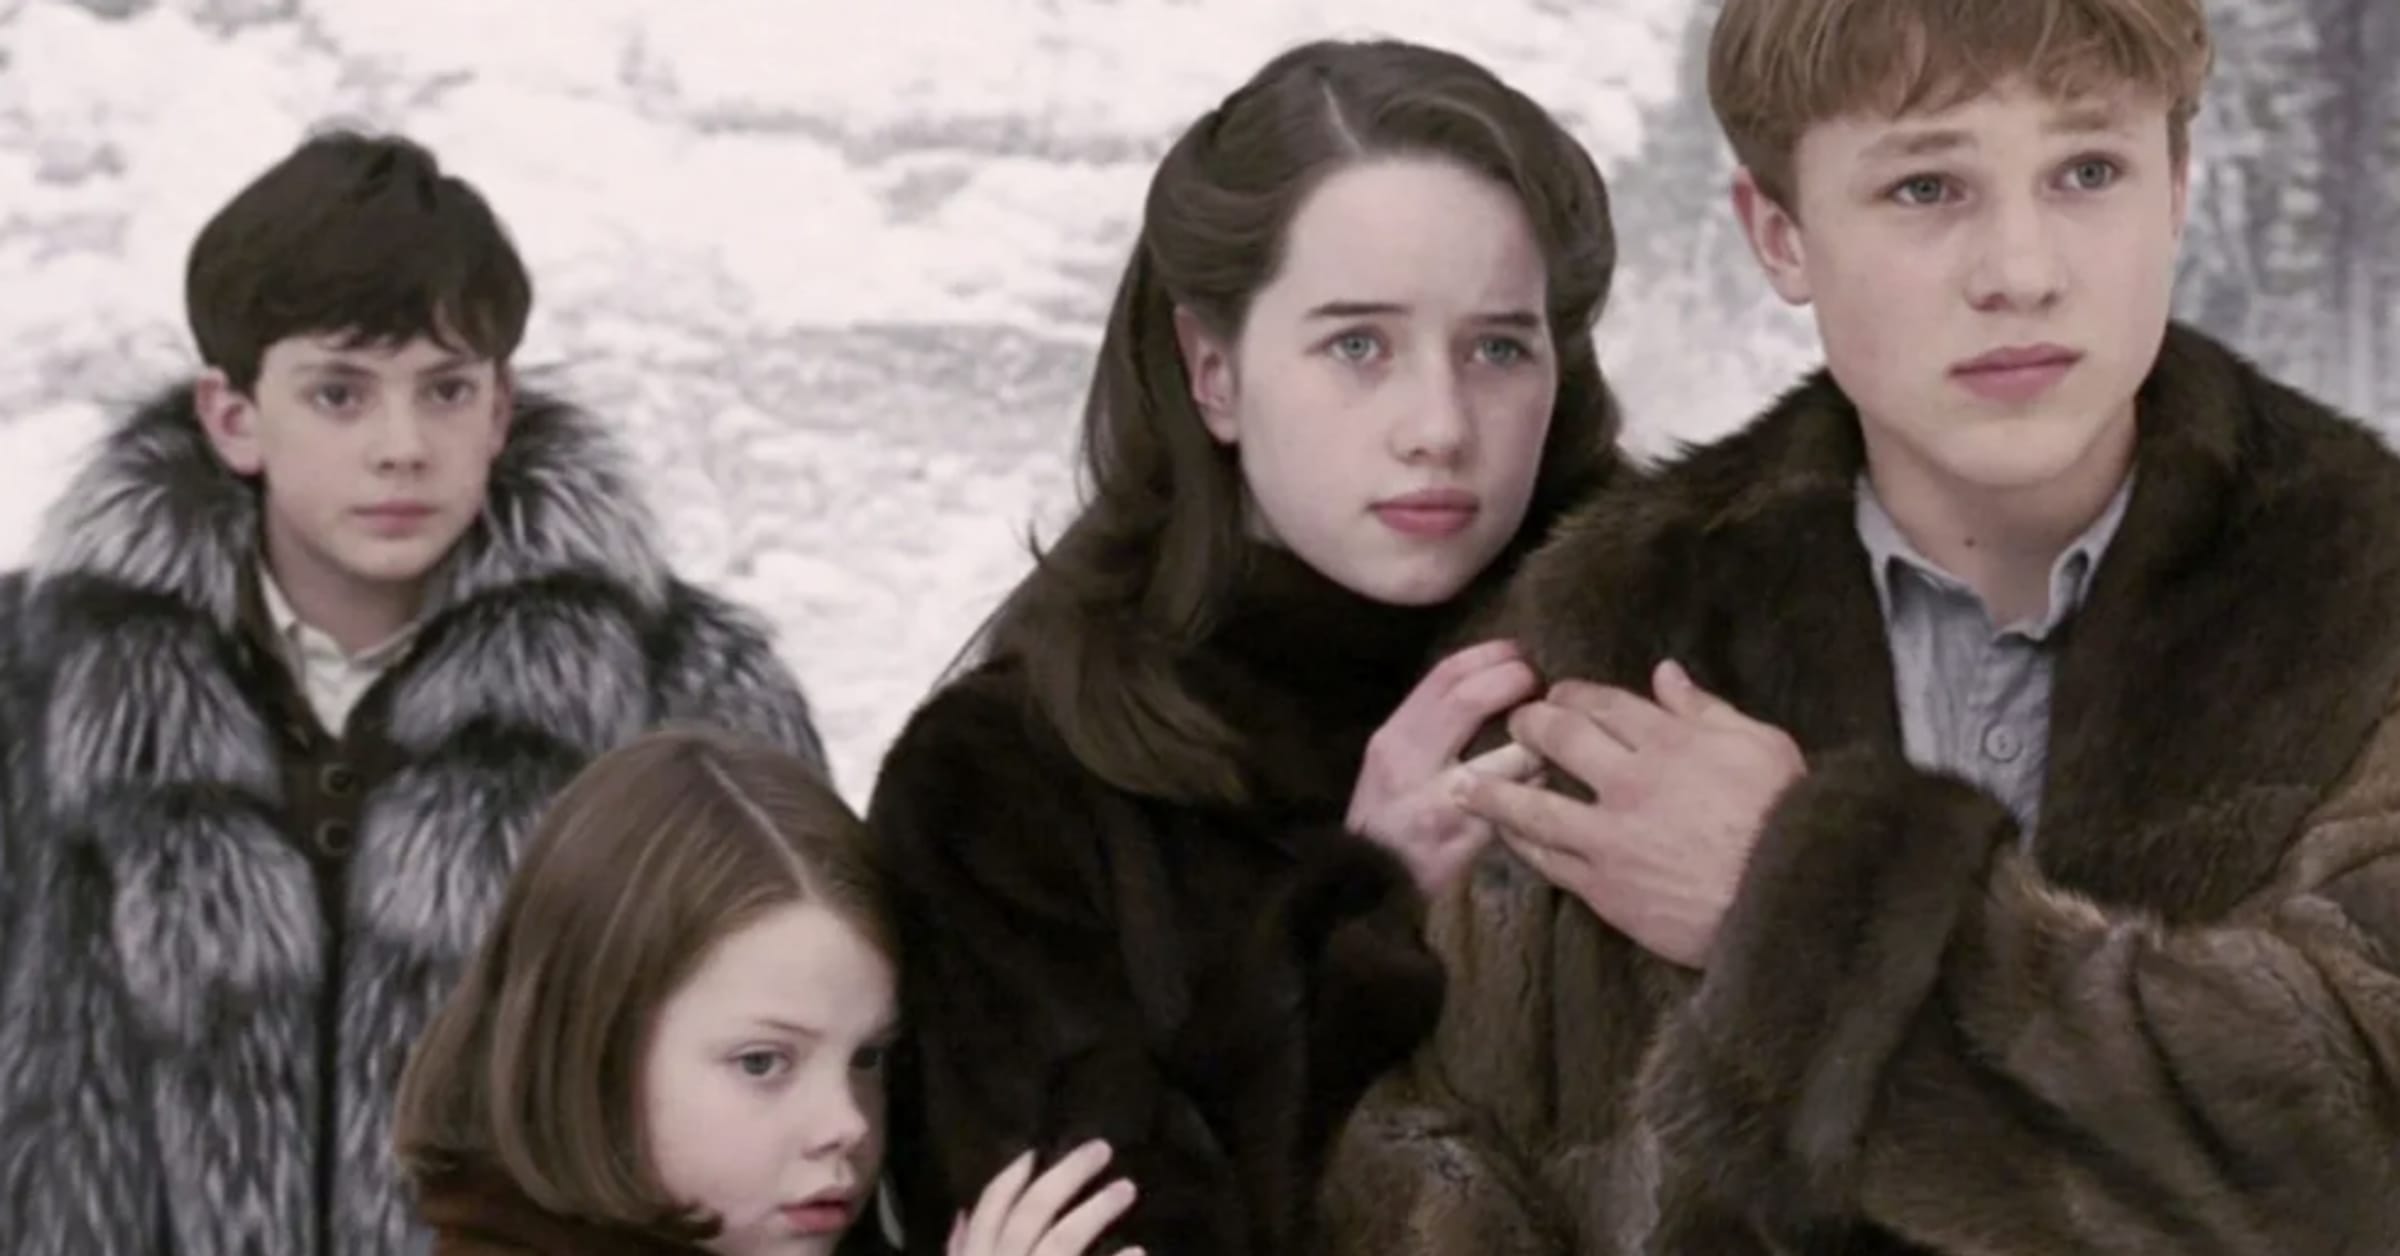 Theory that Harry Potter is connected to Chronicles of Narnia is